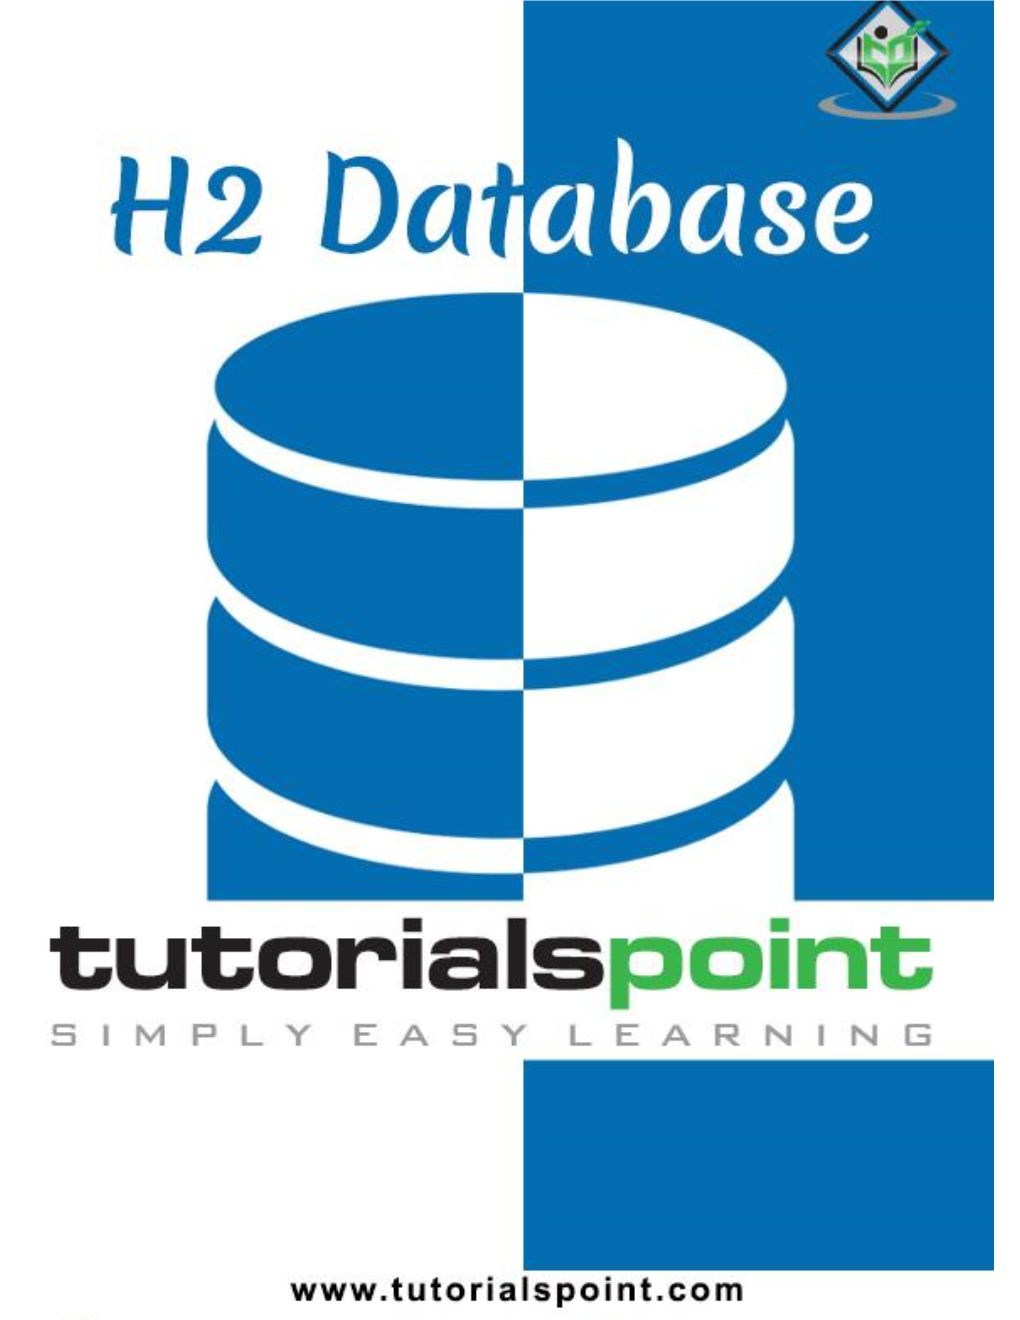 Preview H2 Database Tutorial